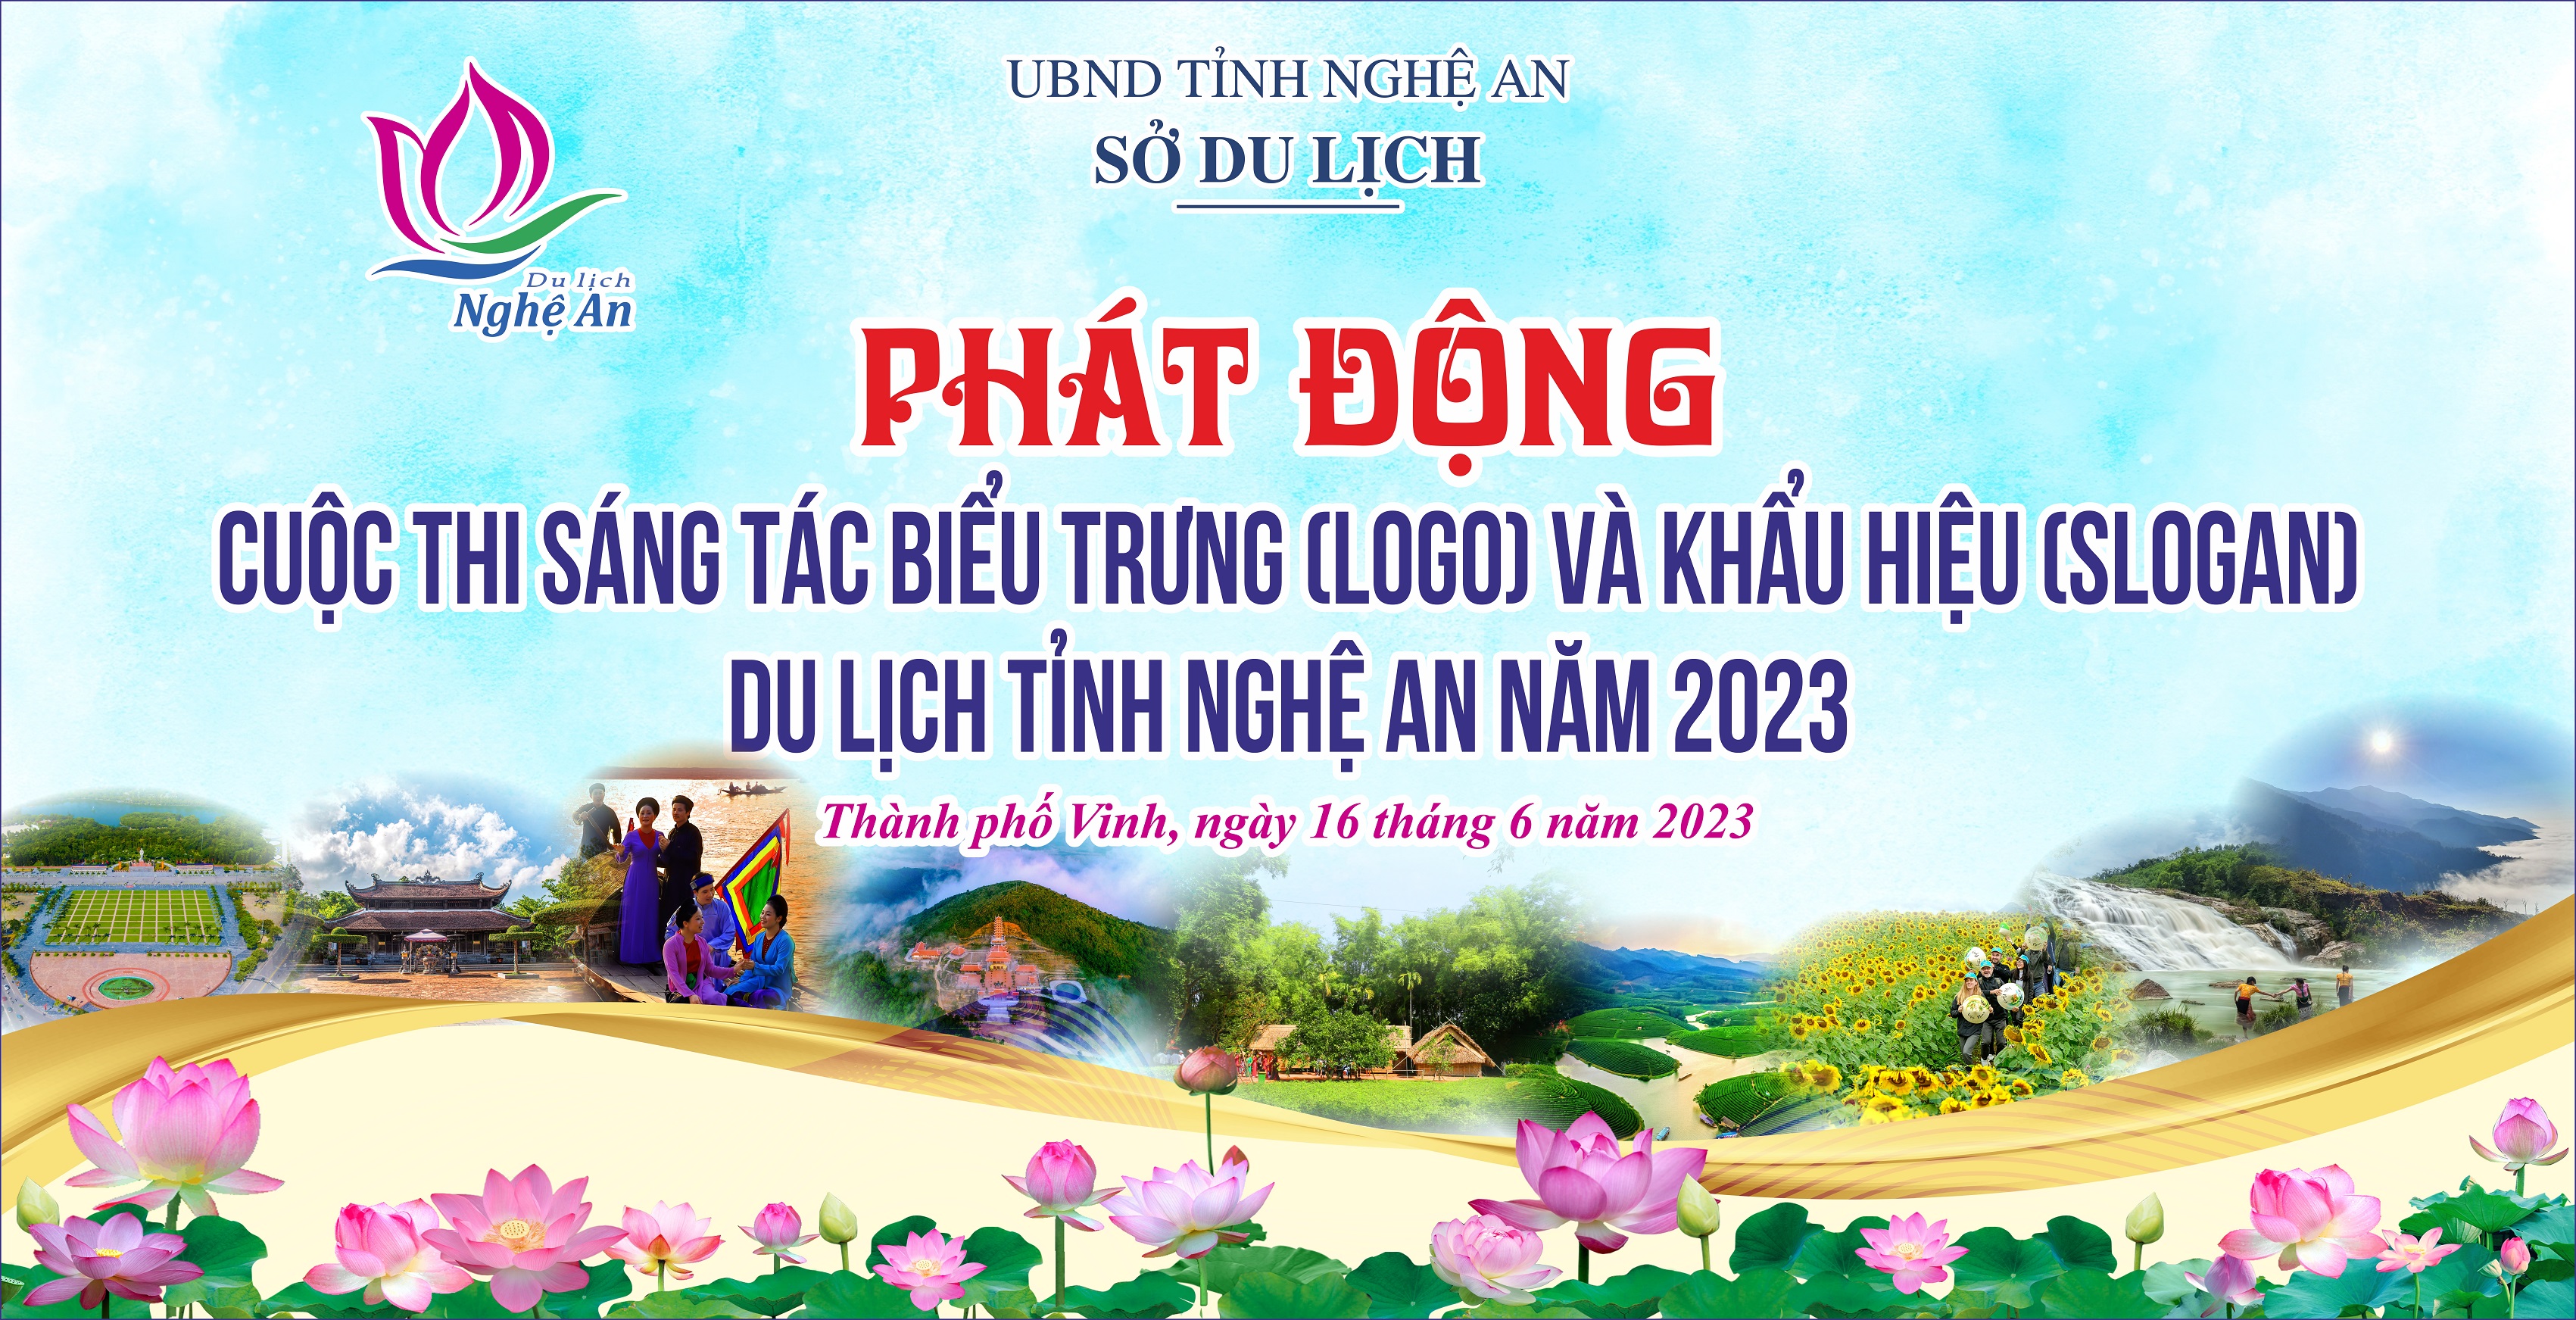 Competition for creating tourism logos and slogans in Nghe An province in 2023